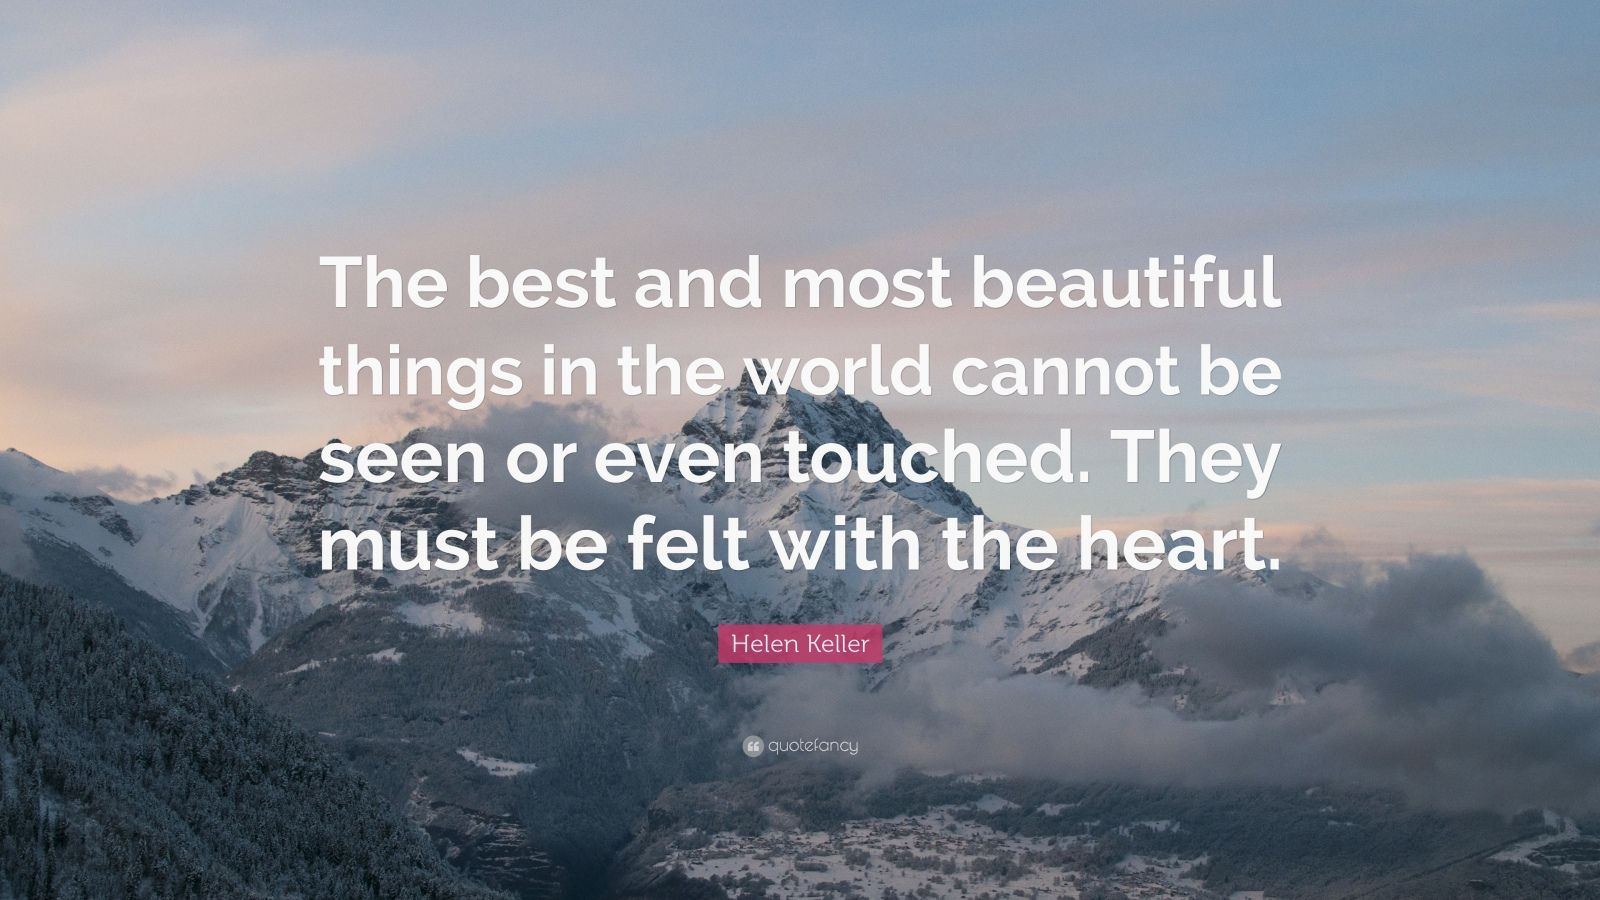 Helen Keller Quote: "The best and most beautiful things in ...